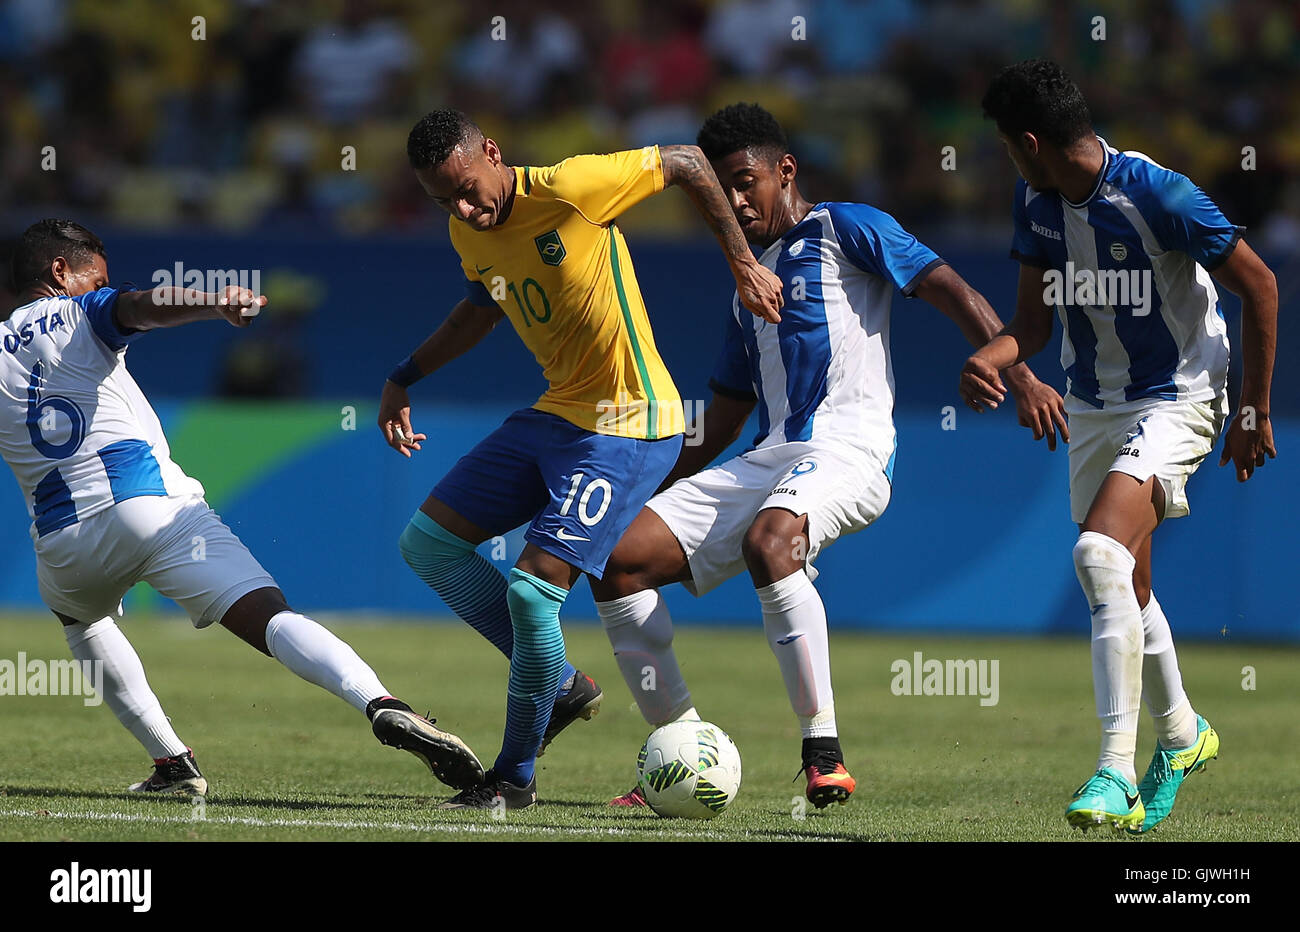 Rio De Janeiro, Brazil. 17th Aug, 2016. Brazil's Neymar (2nd L) competes during the men's football semifinal between Brazil and Honduras at the 2016 Rio Olympic Games in Rio de Janeiro, Brazil, on Aug. 17, 2016. Brazil won the match with 6:0. Credit:  Cao Can/Xinhua/Alamy Live News Stock Photo